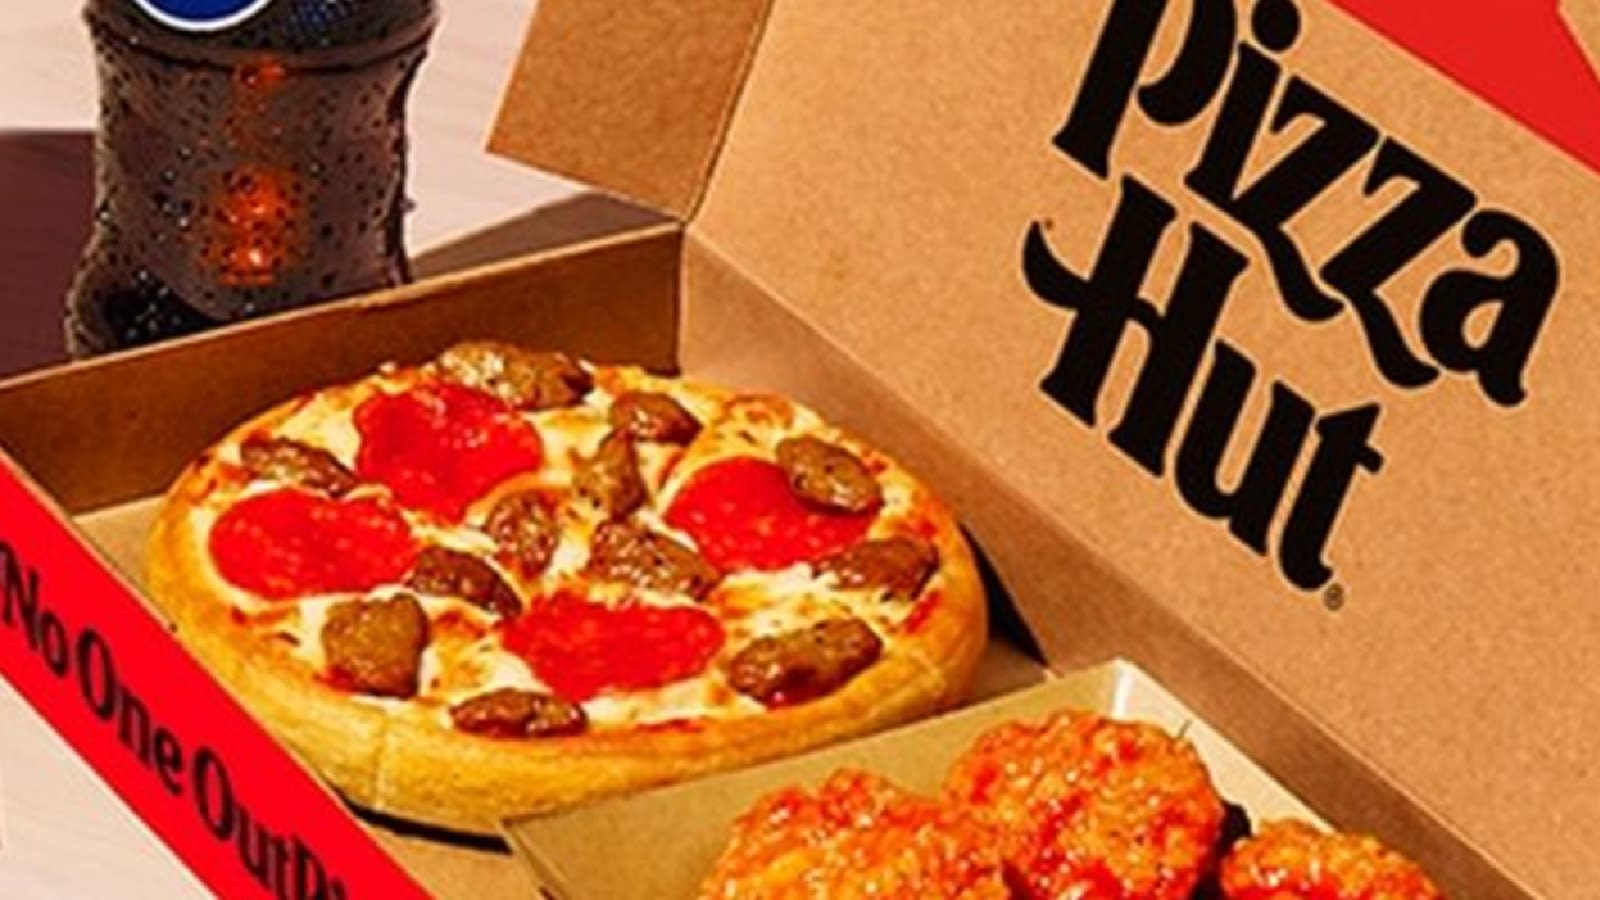 Pizza Hut’s My Hut Box gets your favorites for cheap - Dexerto